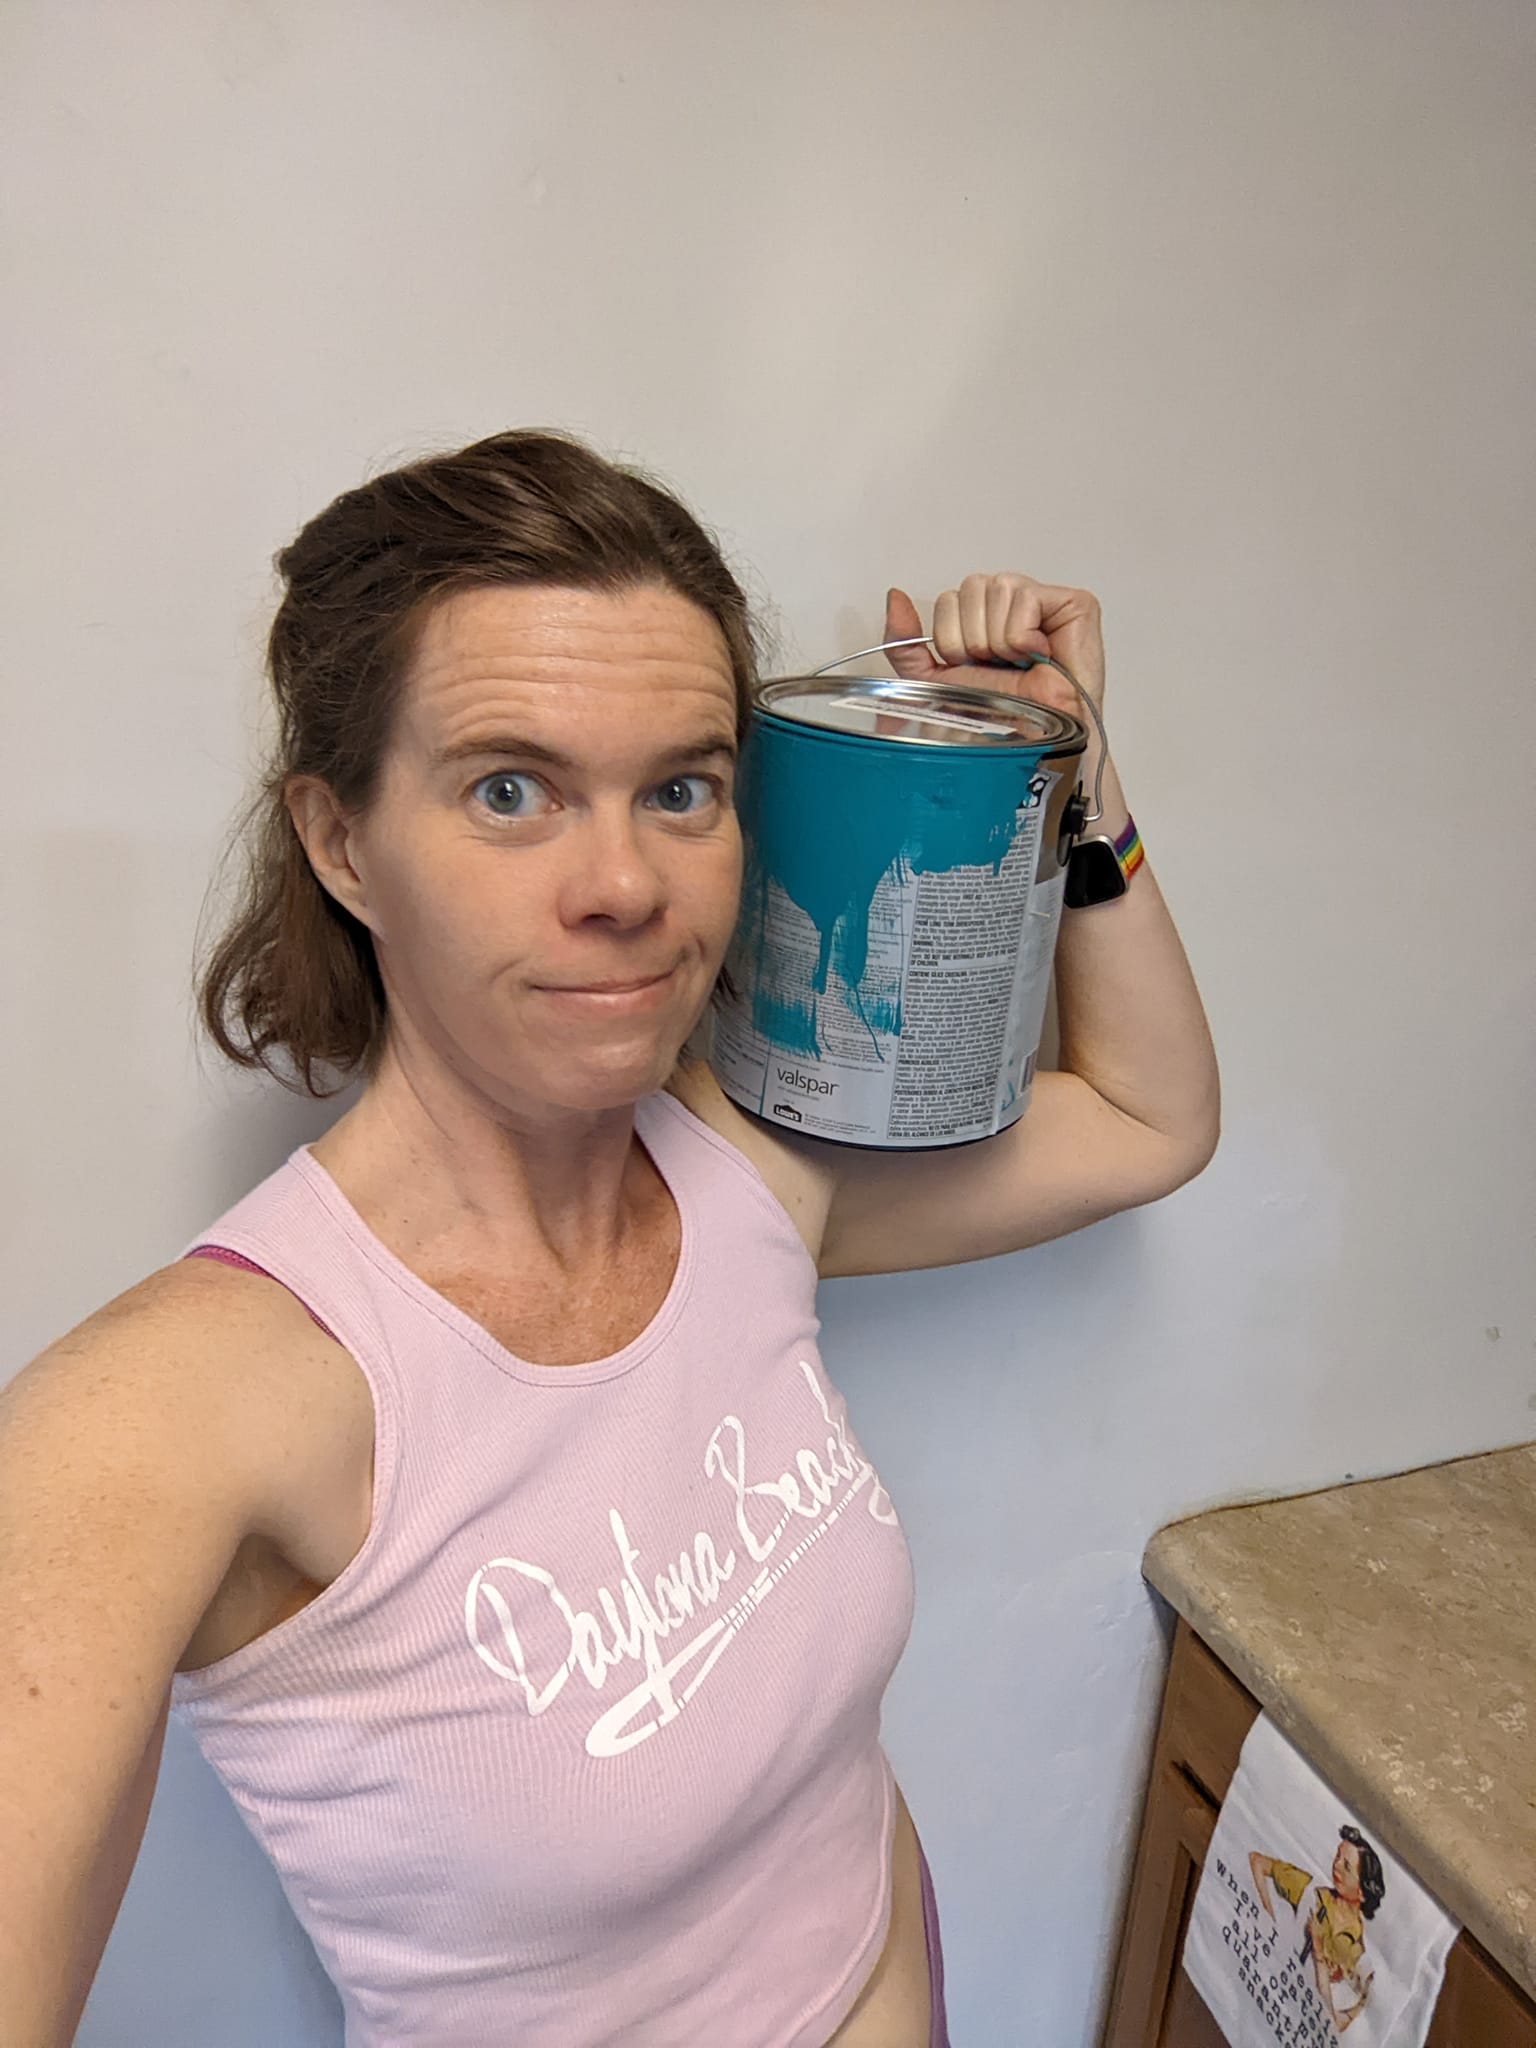 selfie against a white wall holding a can of teal blue paint